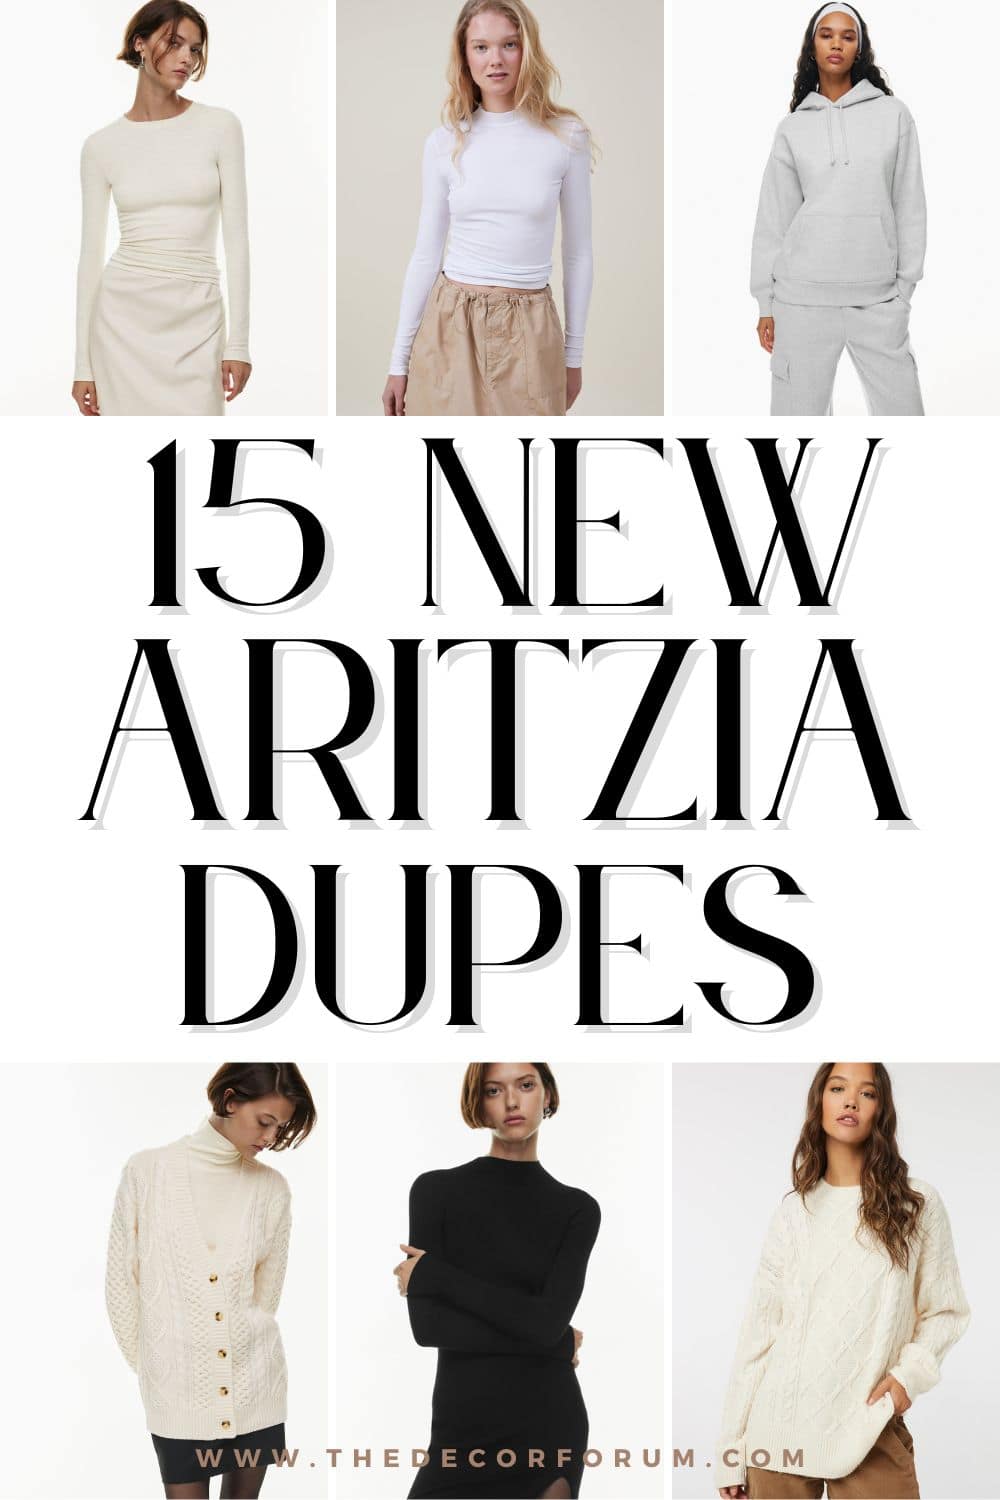 TNA set—what are your favorite colors? : r/Aritzia